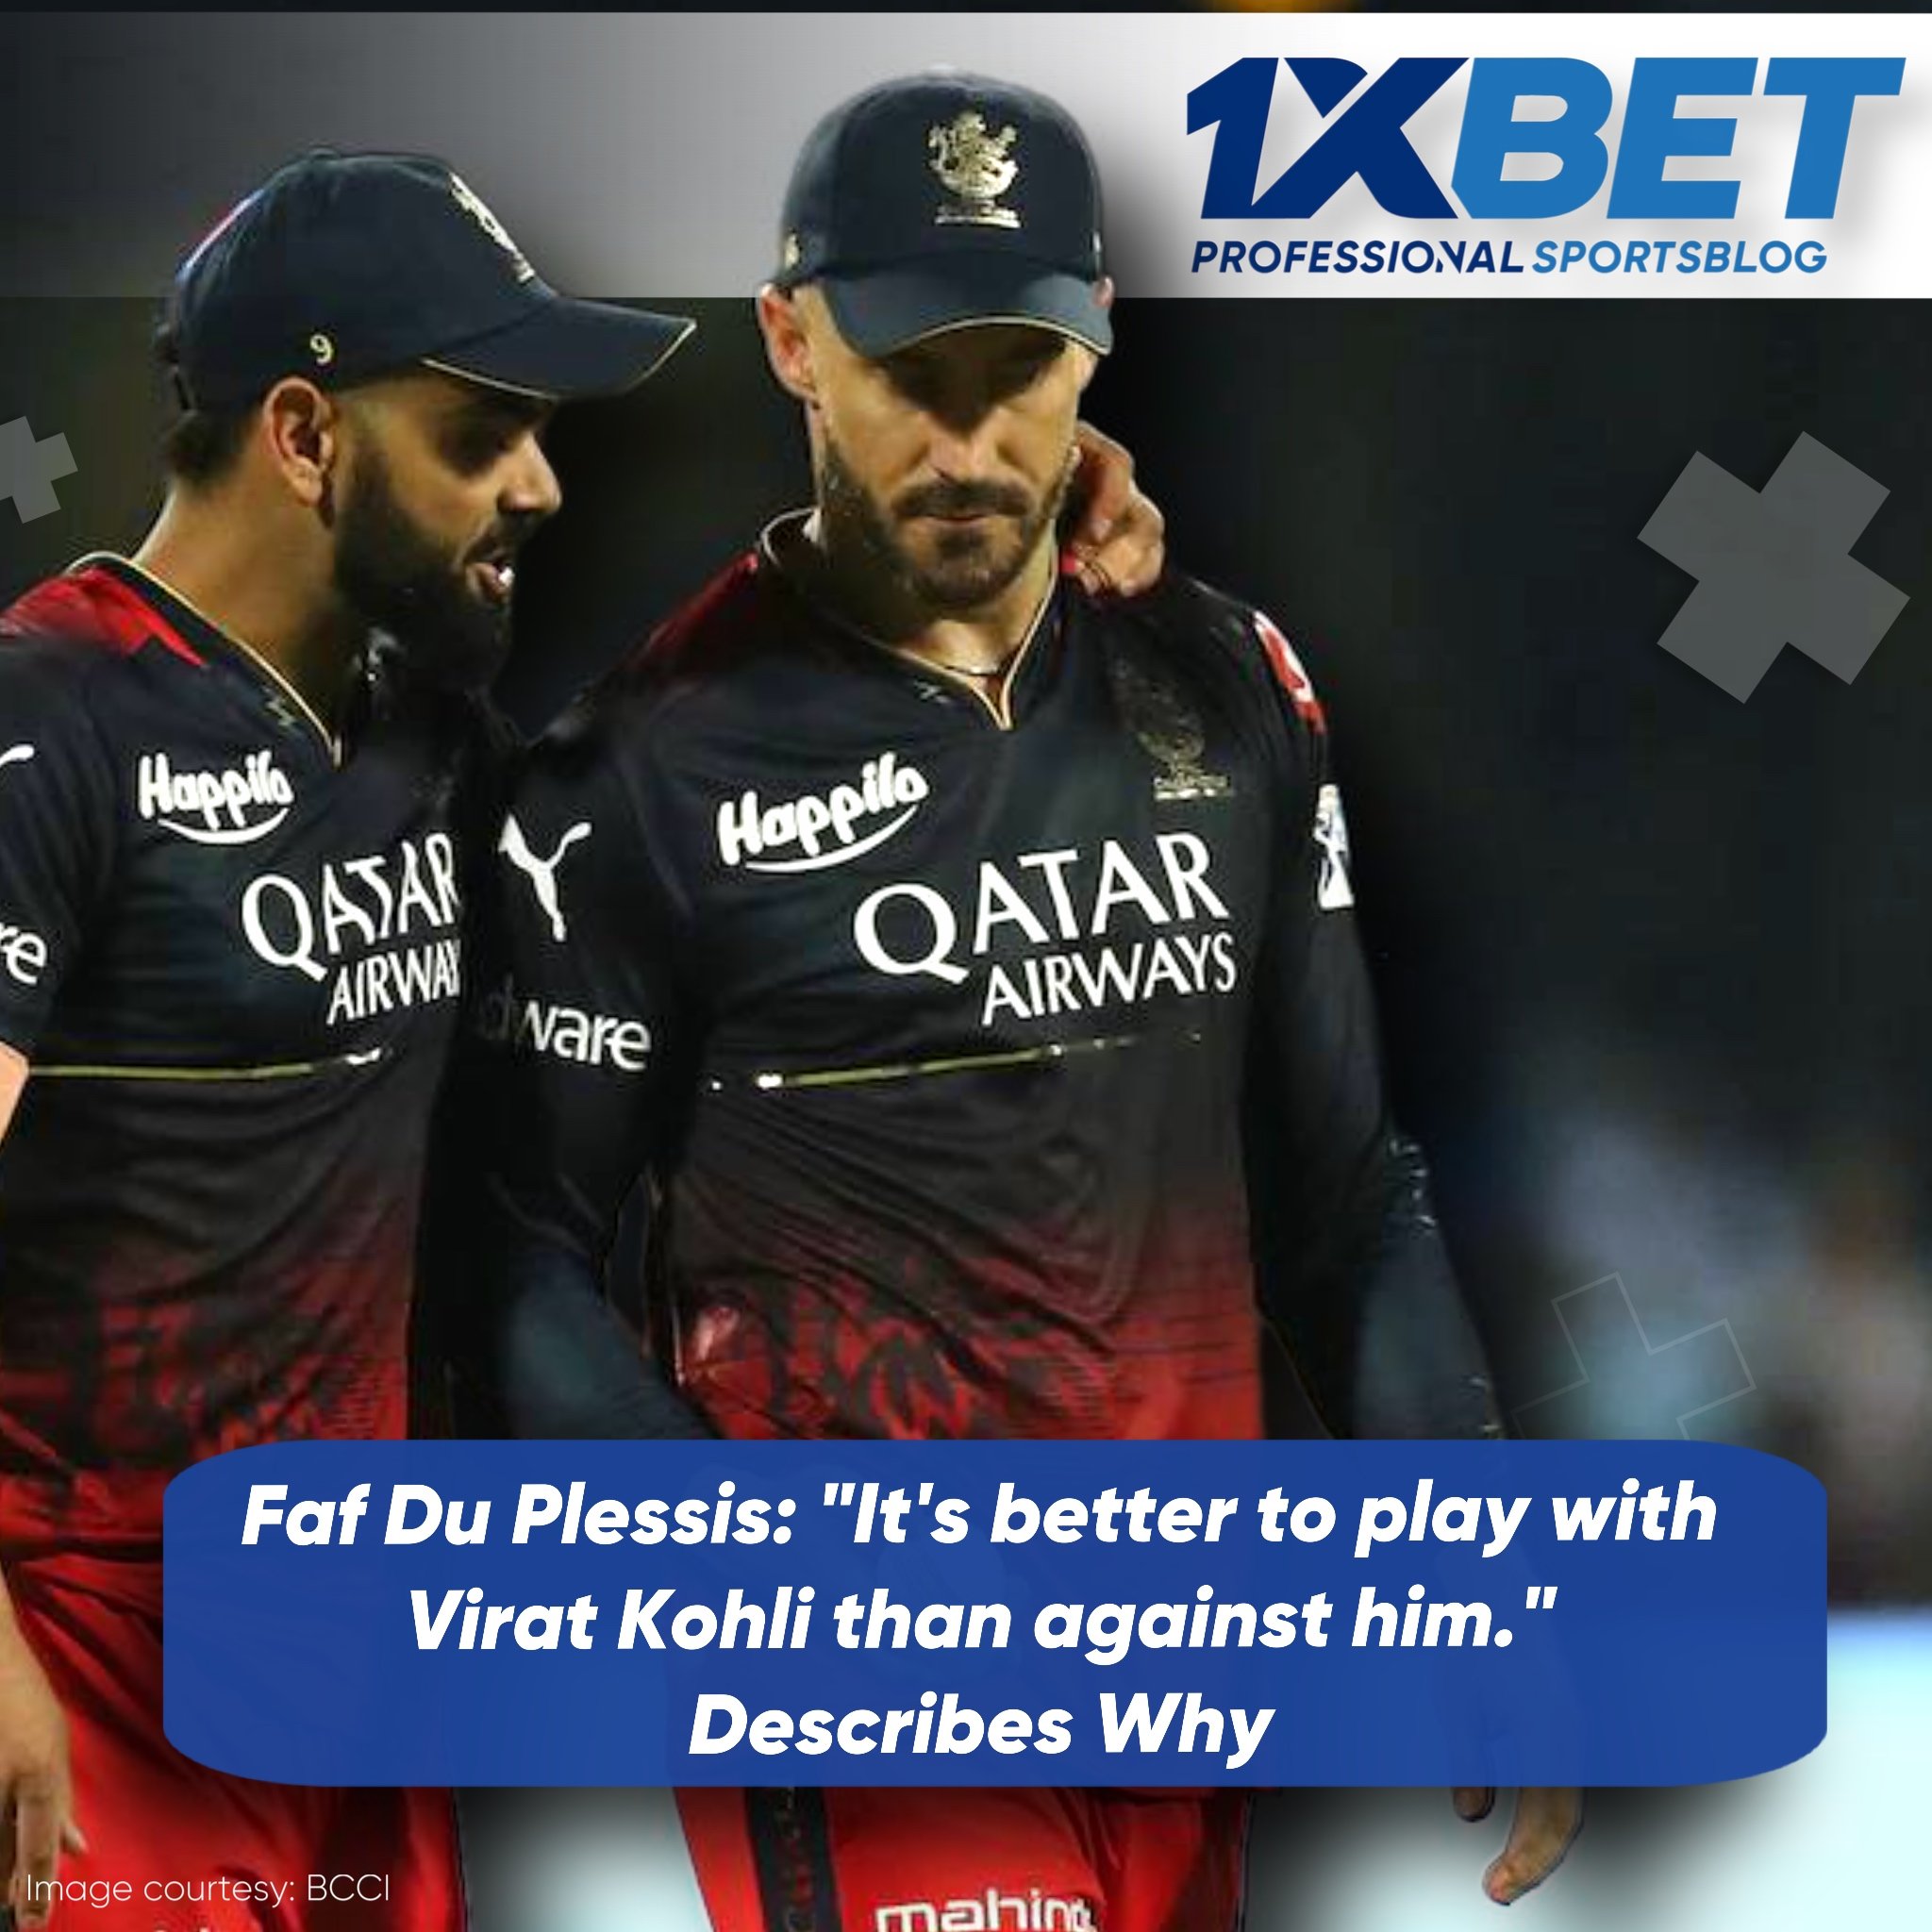 Faf Du Plessis: "It's better to play with Virat Kohli than against him." Describes Why